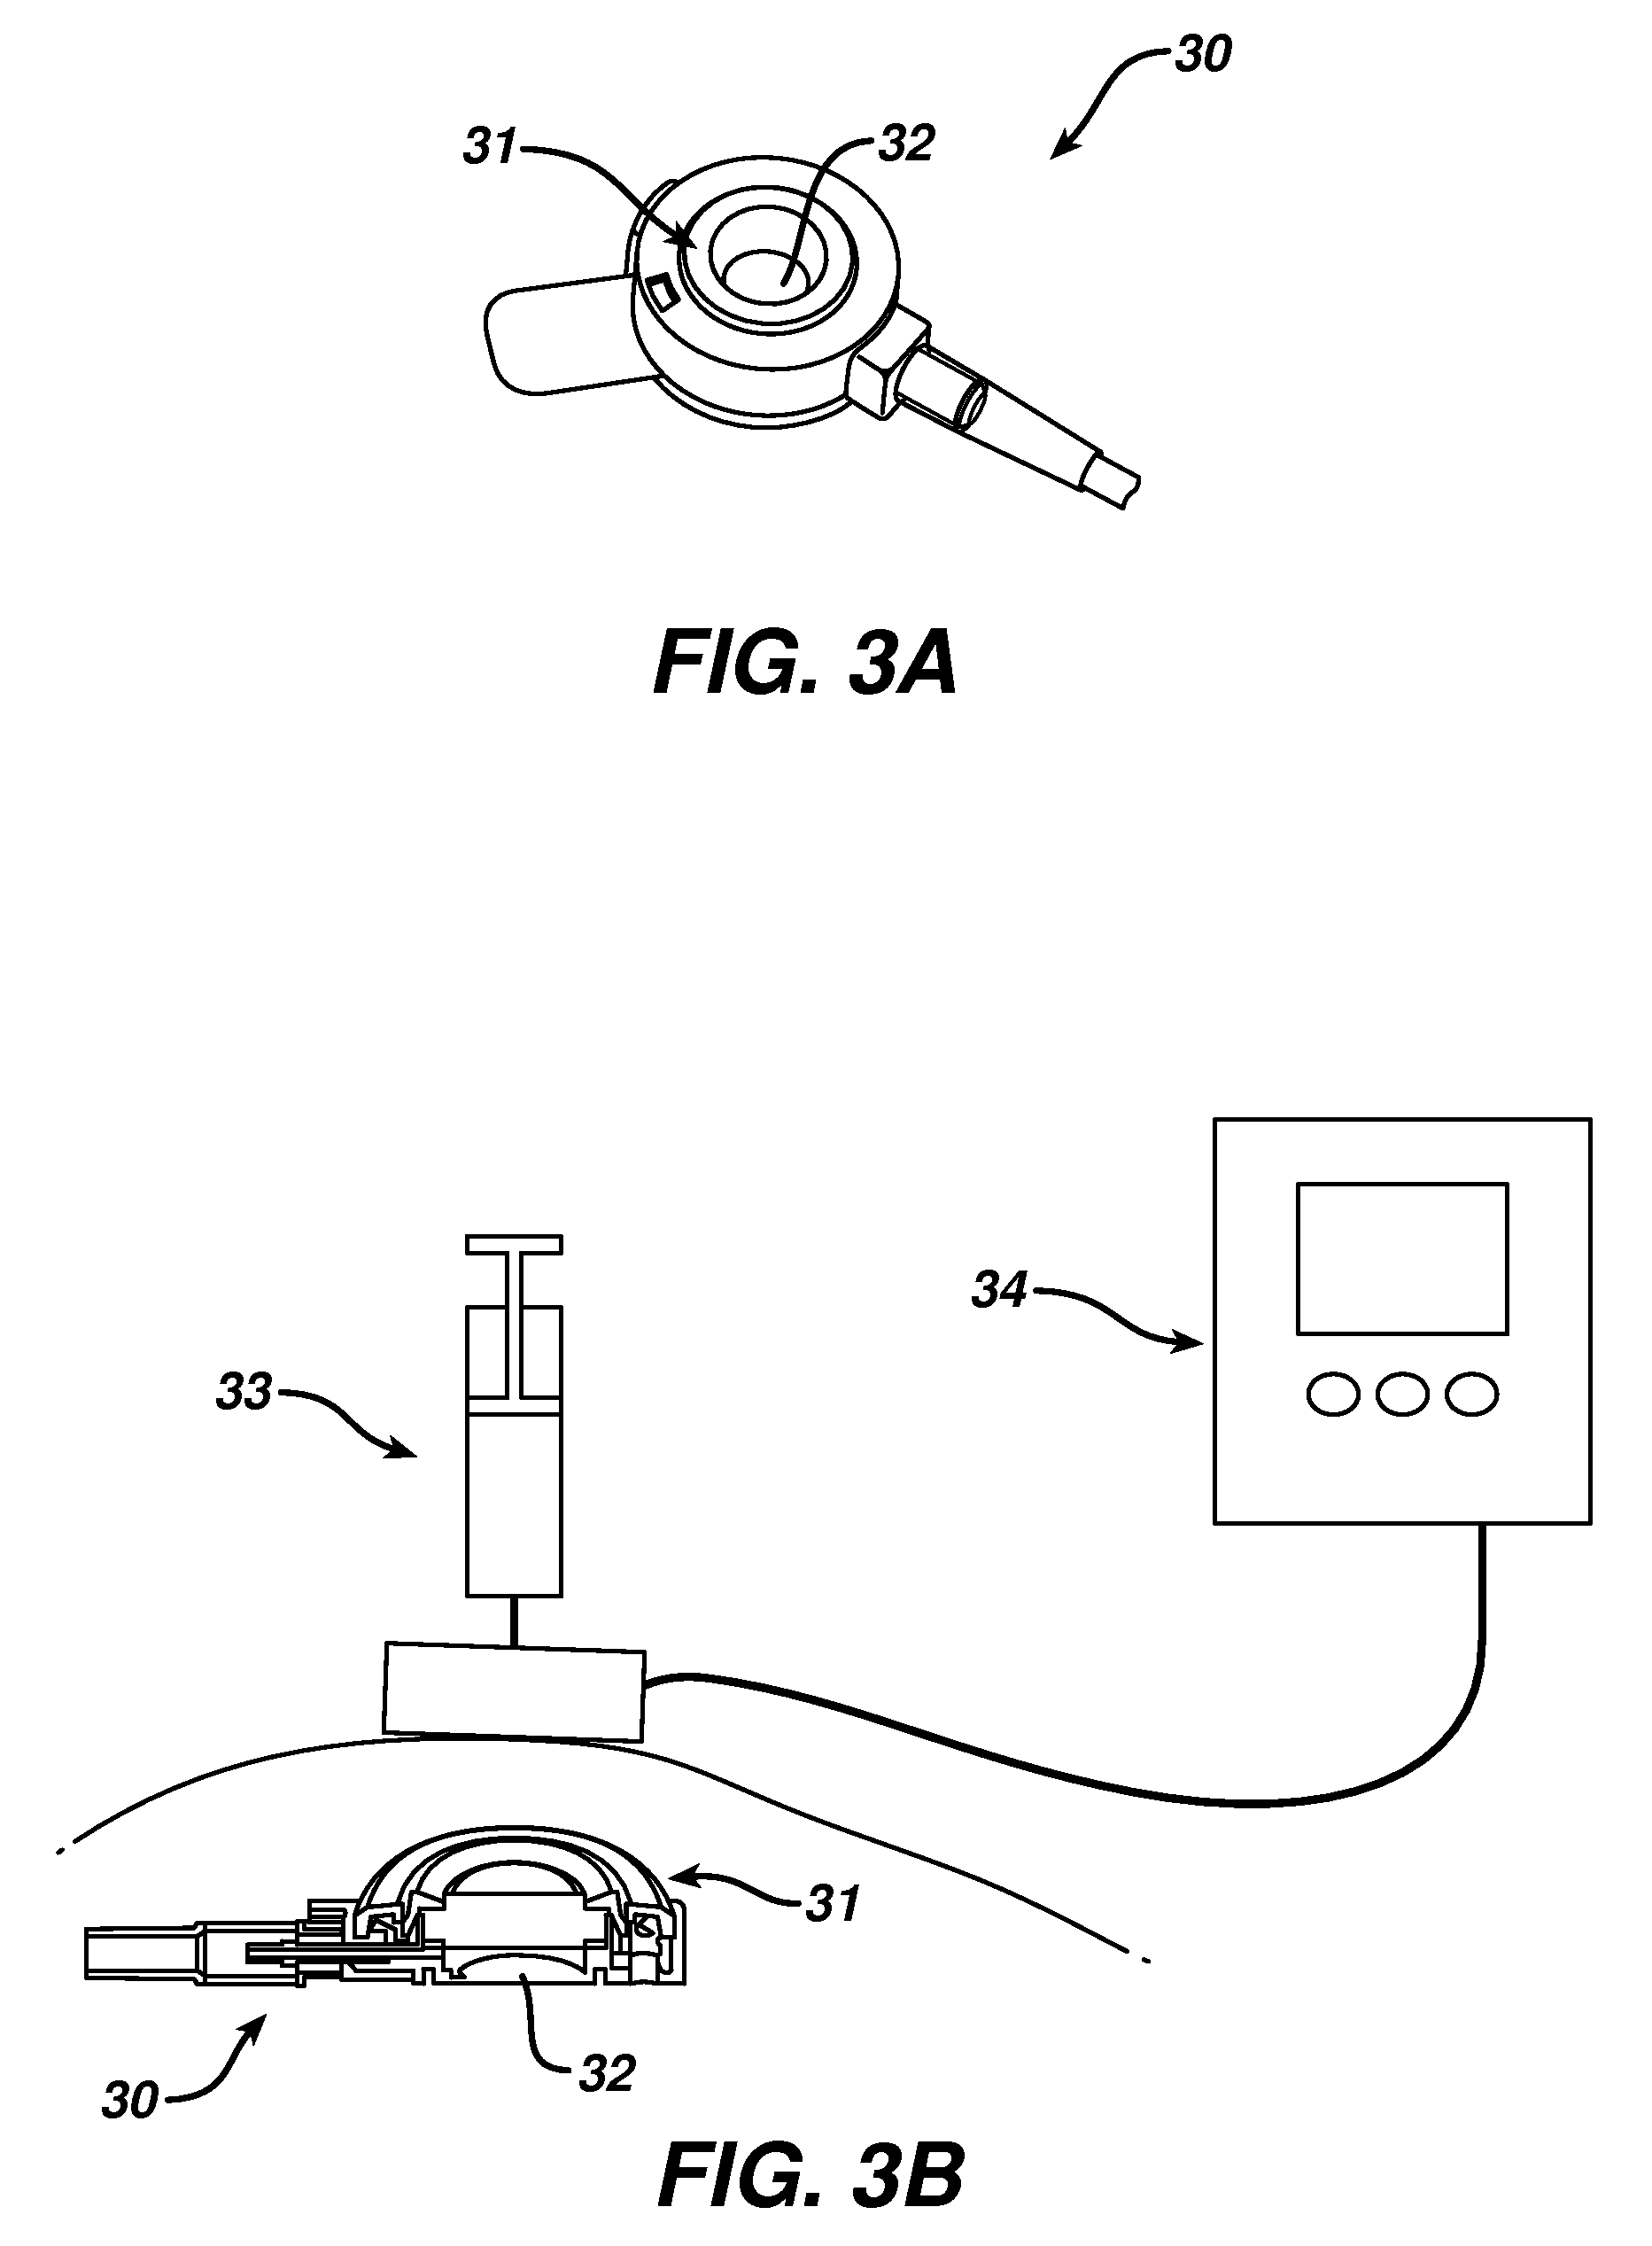 Biocompatible nanoparticle compositions and methods